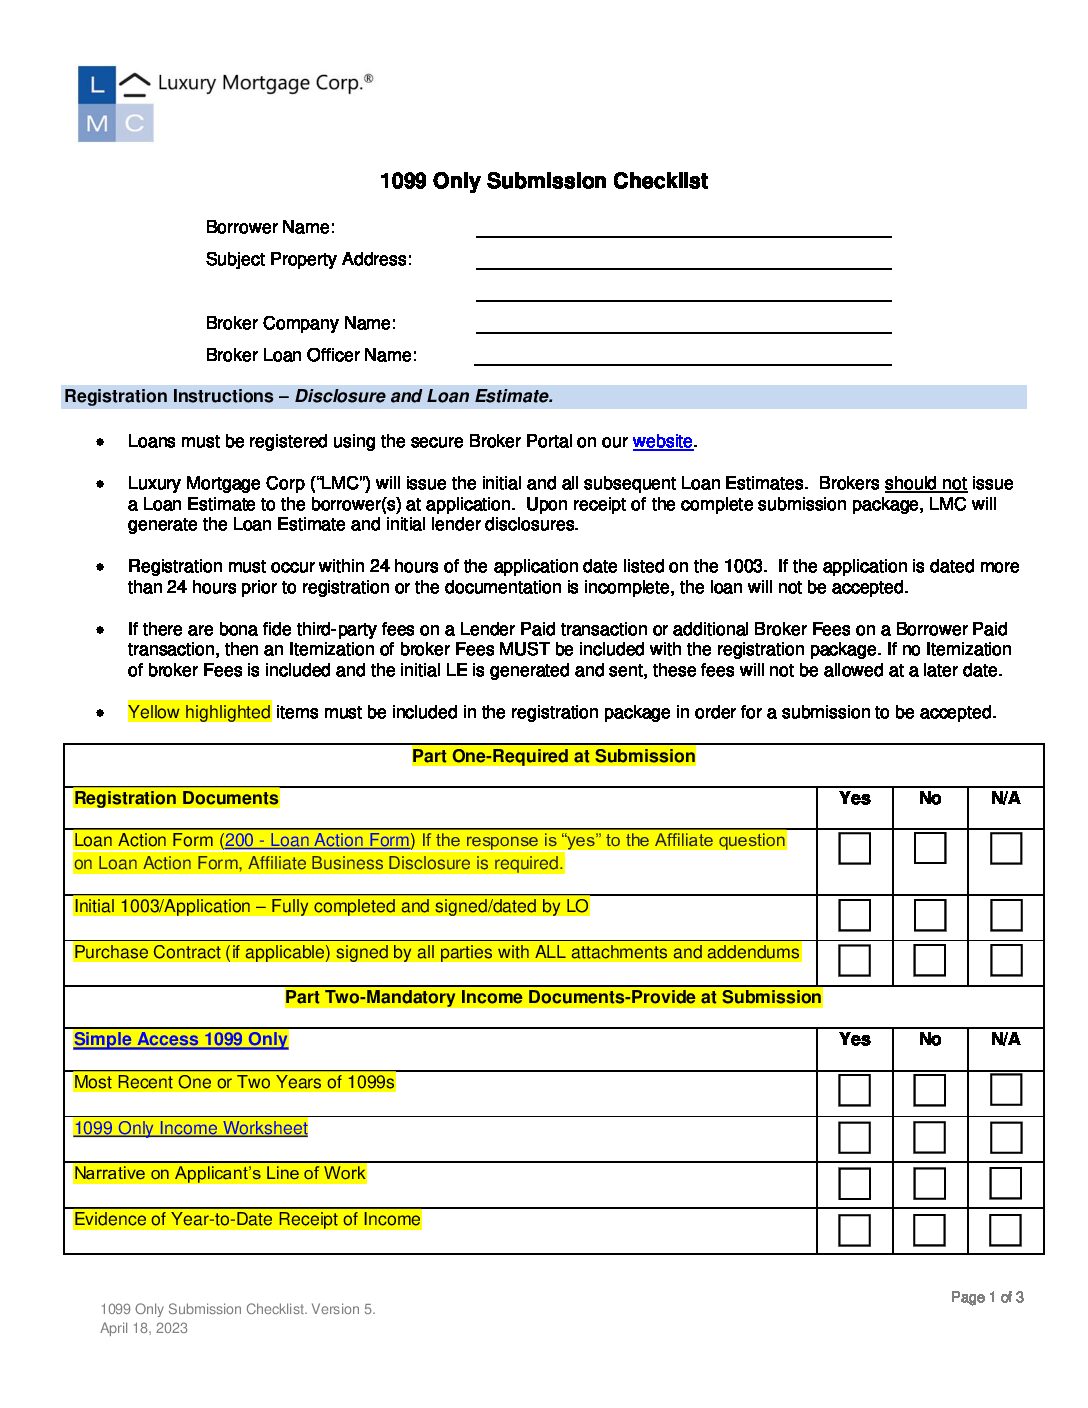 1099 Only Submission Checklist V.4